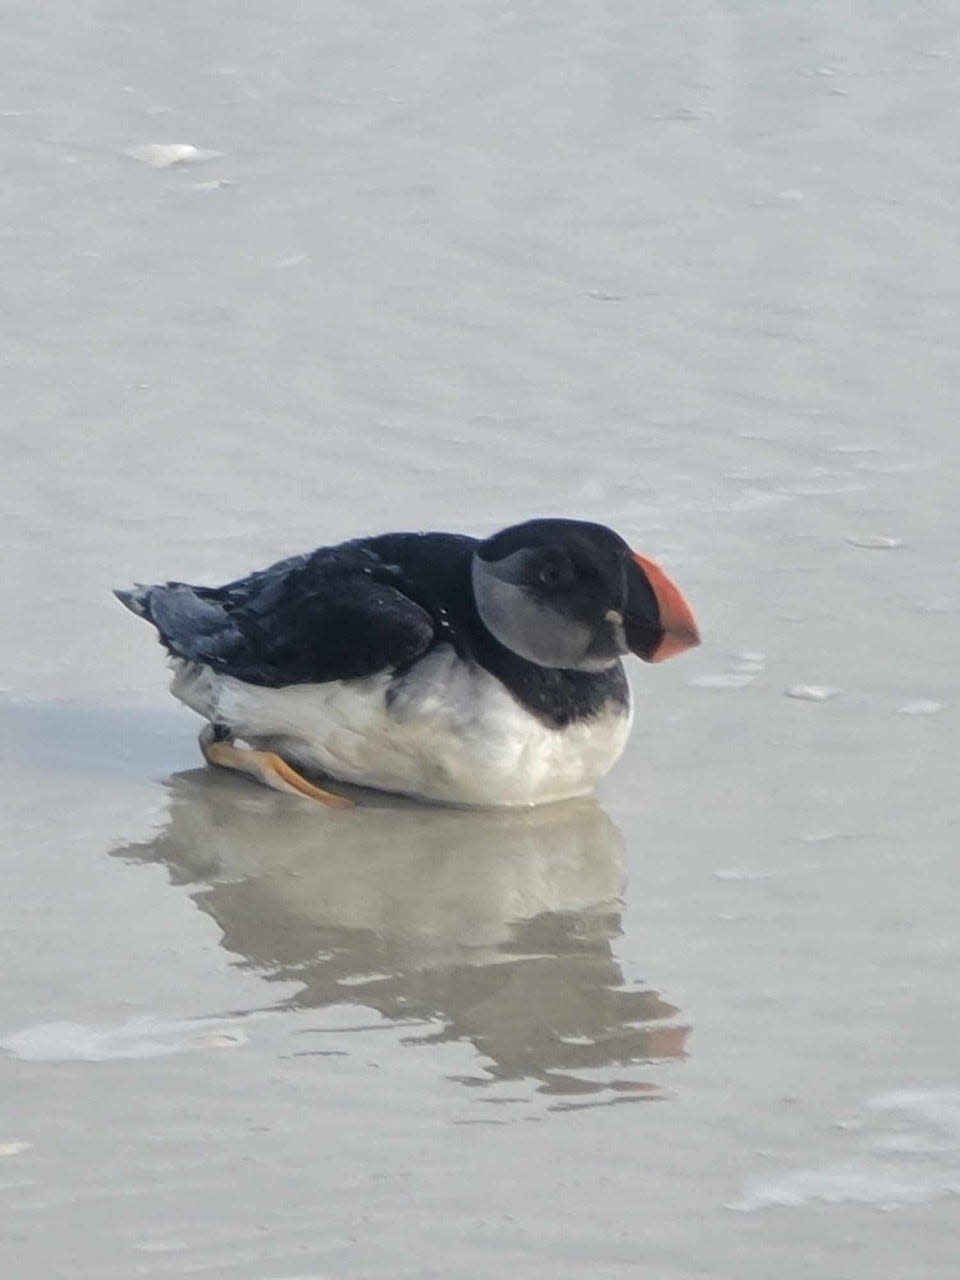 An Atlantic puffin strands on a beach in Ponce Inlet, a long way from its home in the North Atlantic. The puffin was rescued on Feb. 16, 2024, and taken to the Mary Keller Seabird Rehabilitation Sanctuary but did not survive.